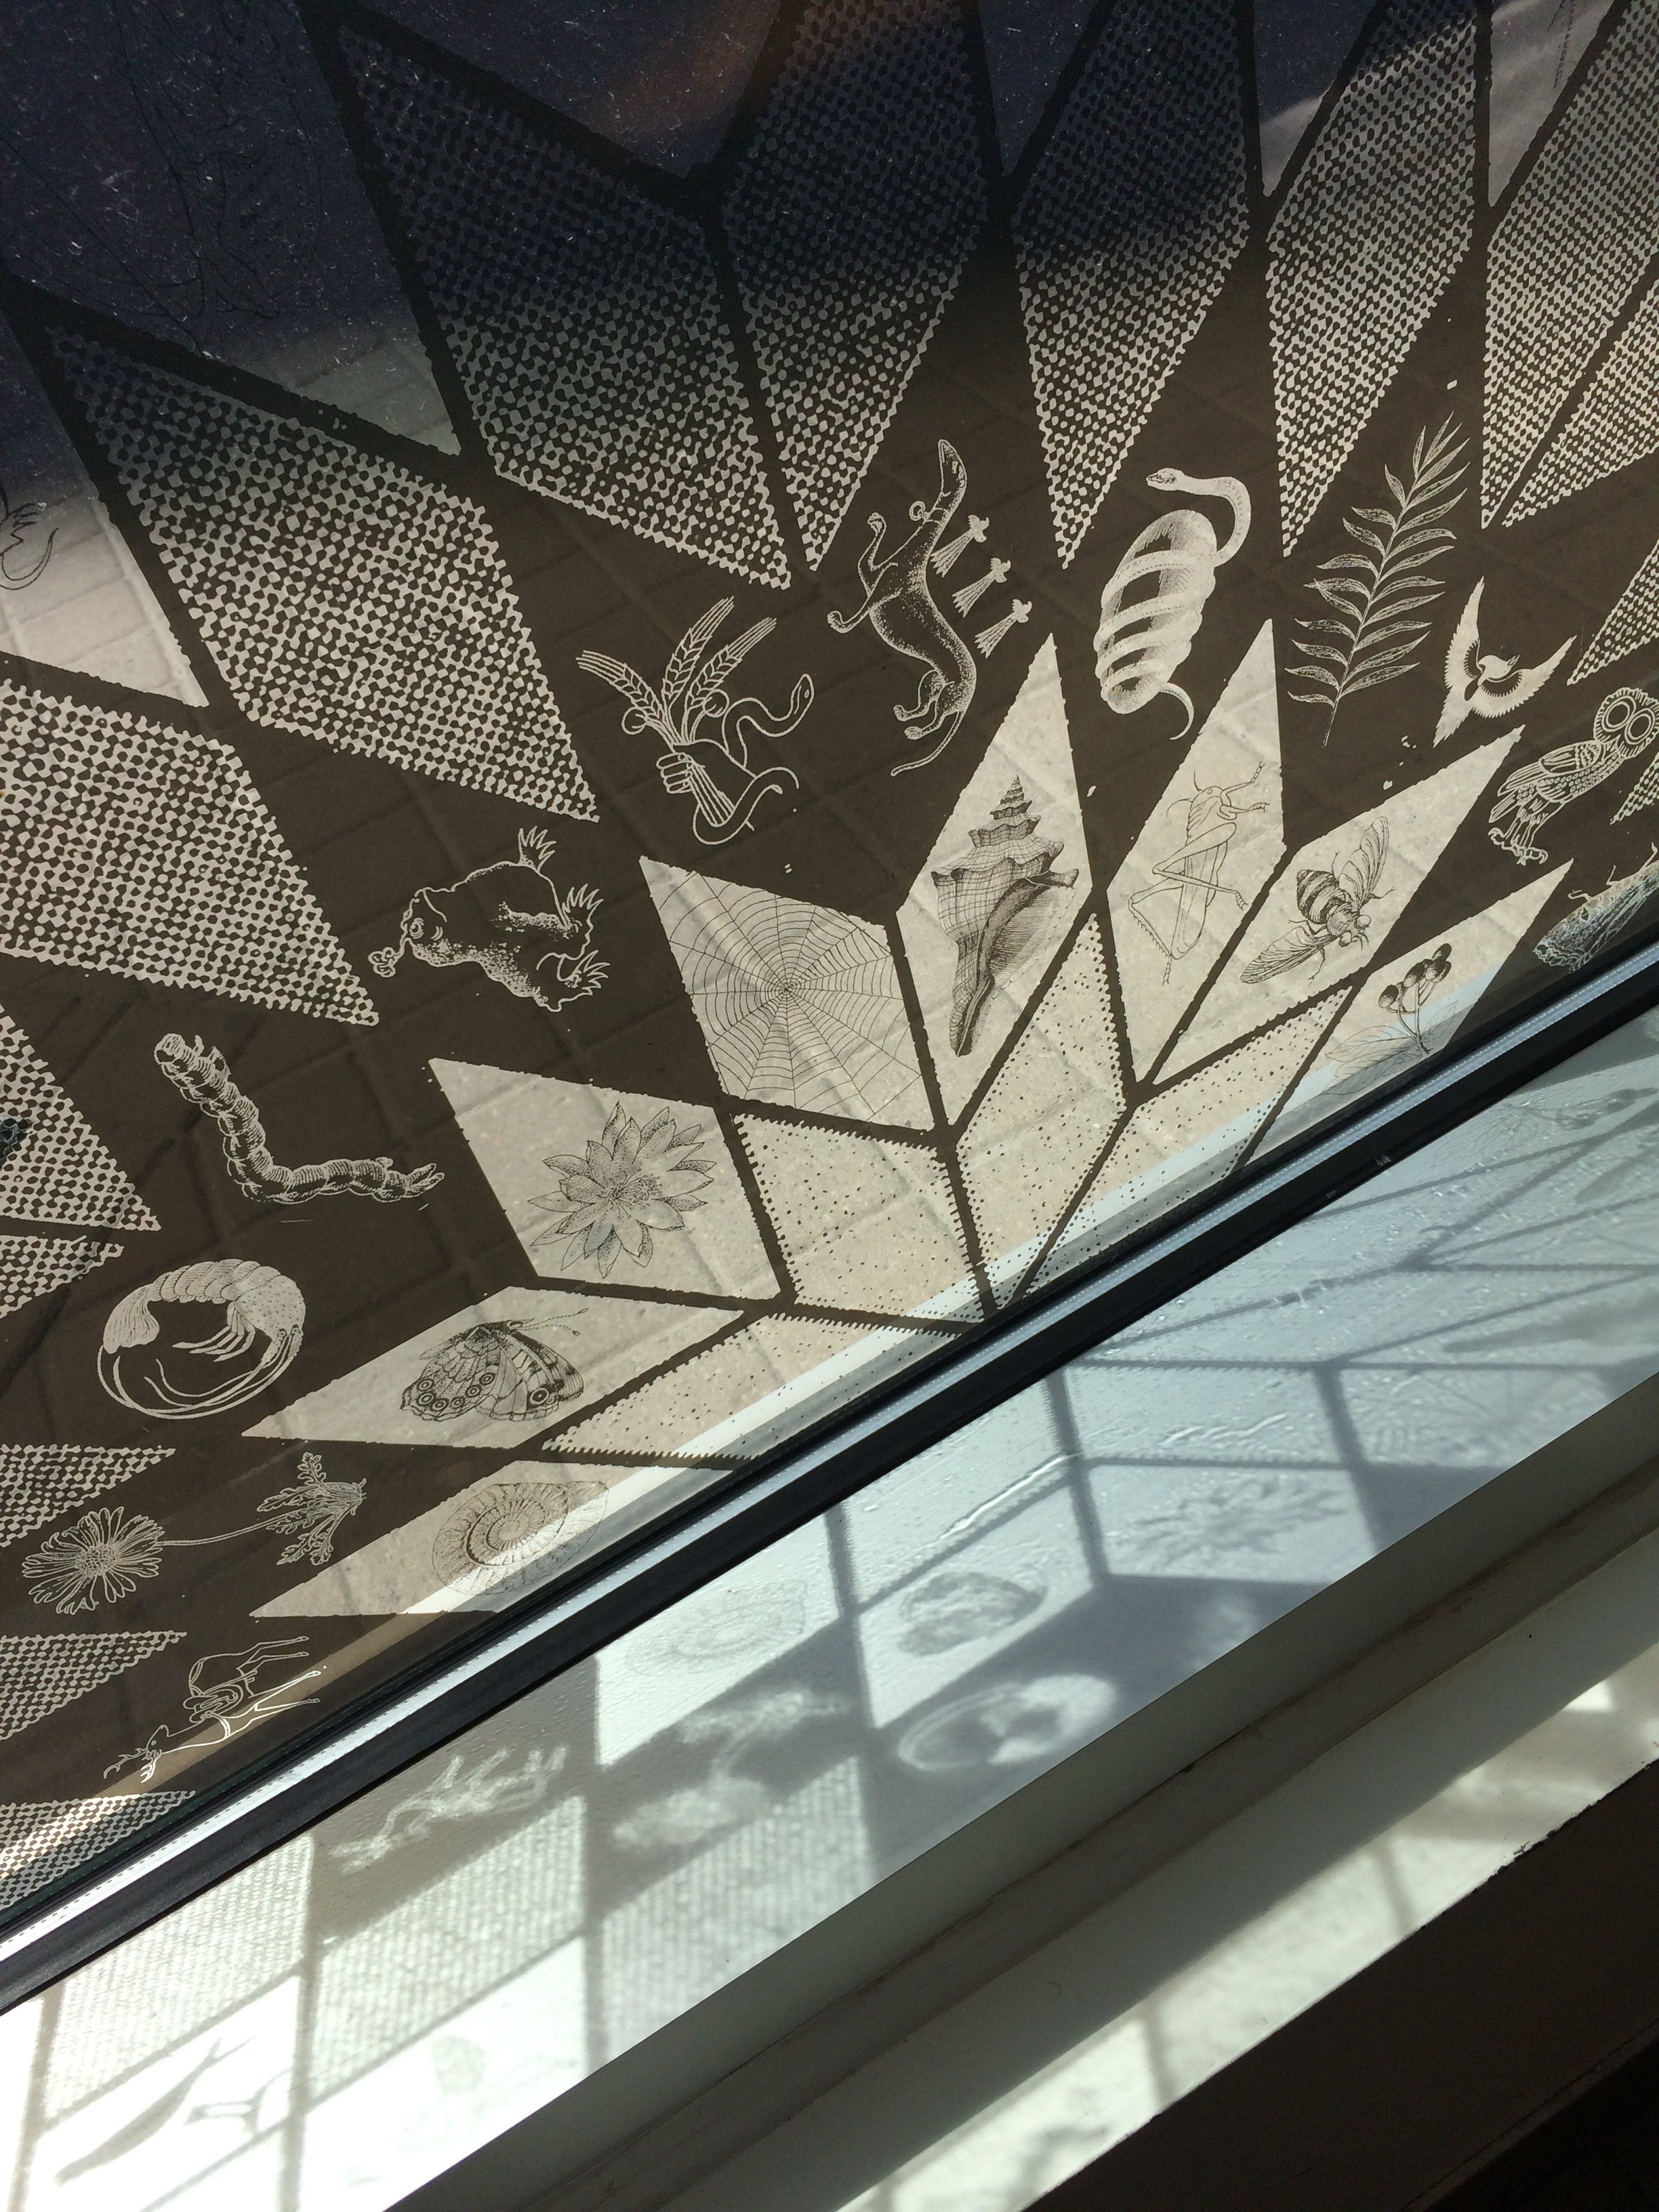  Wandering Star  window vinyl installation  the Browsery at Toronto Reference Library, Toronto  spread across window area of 8ft x 60ft  2019 